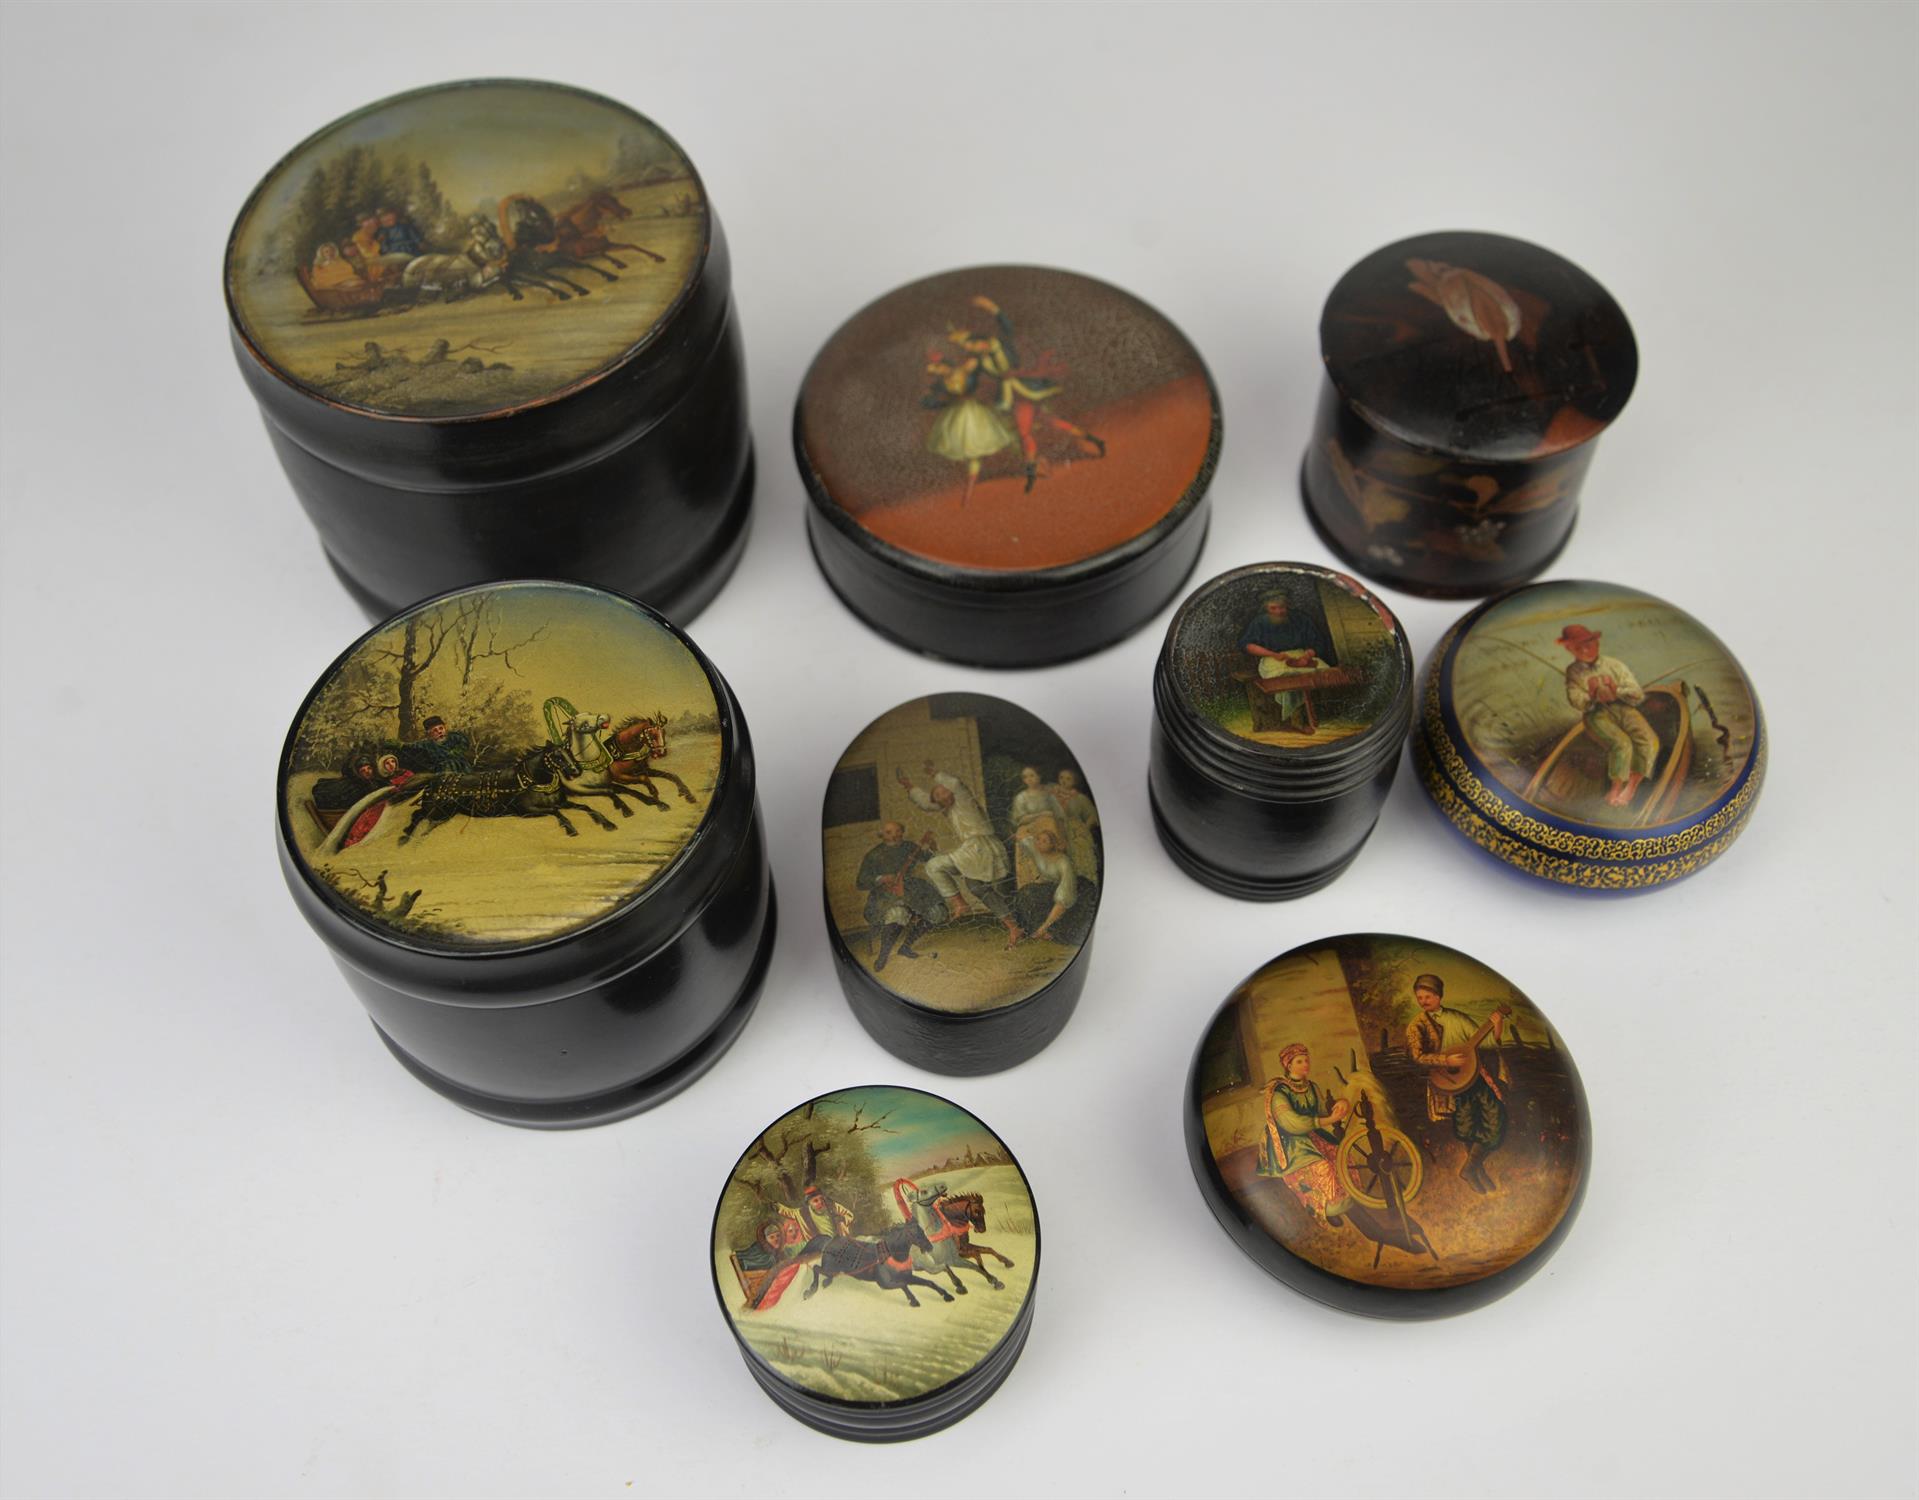 Collection of seven Russian papier-mache boxes, late 19th/early 20th century, depicting various